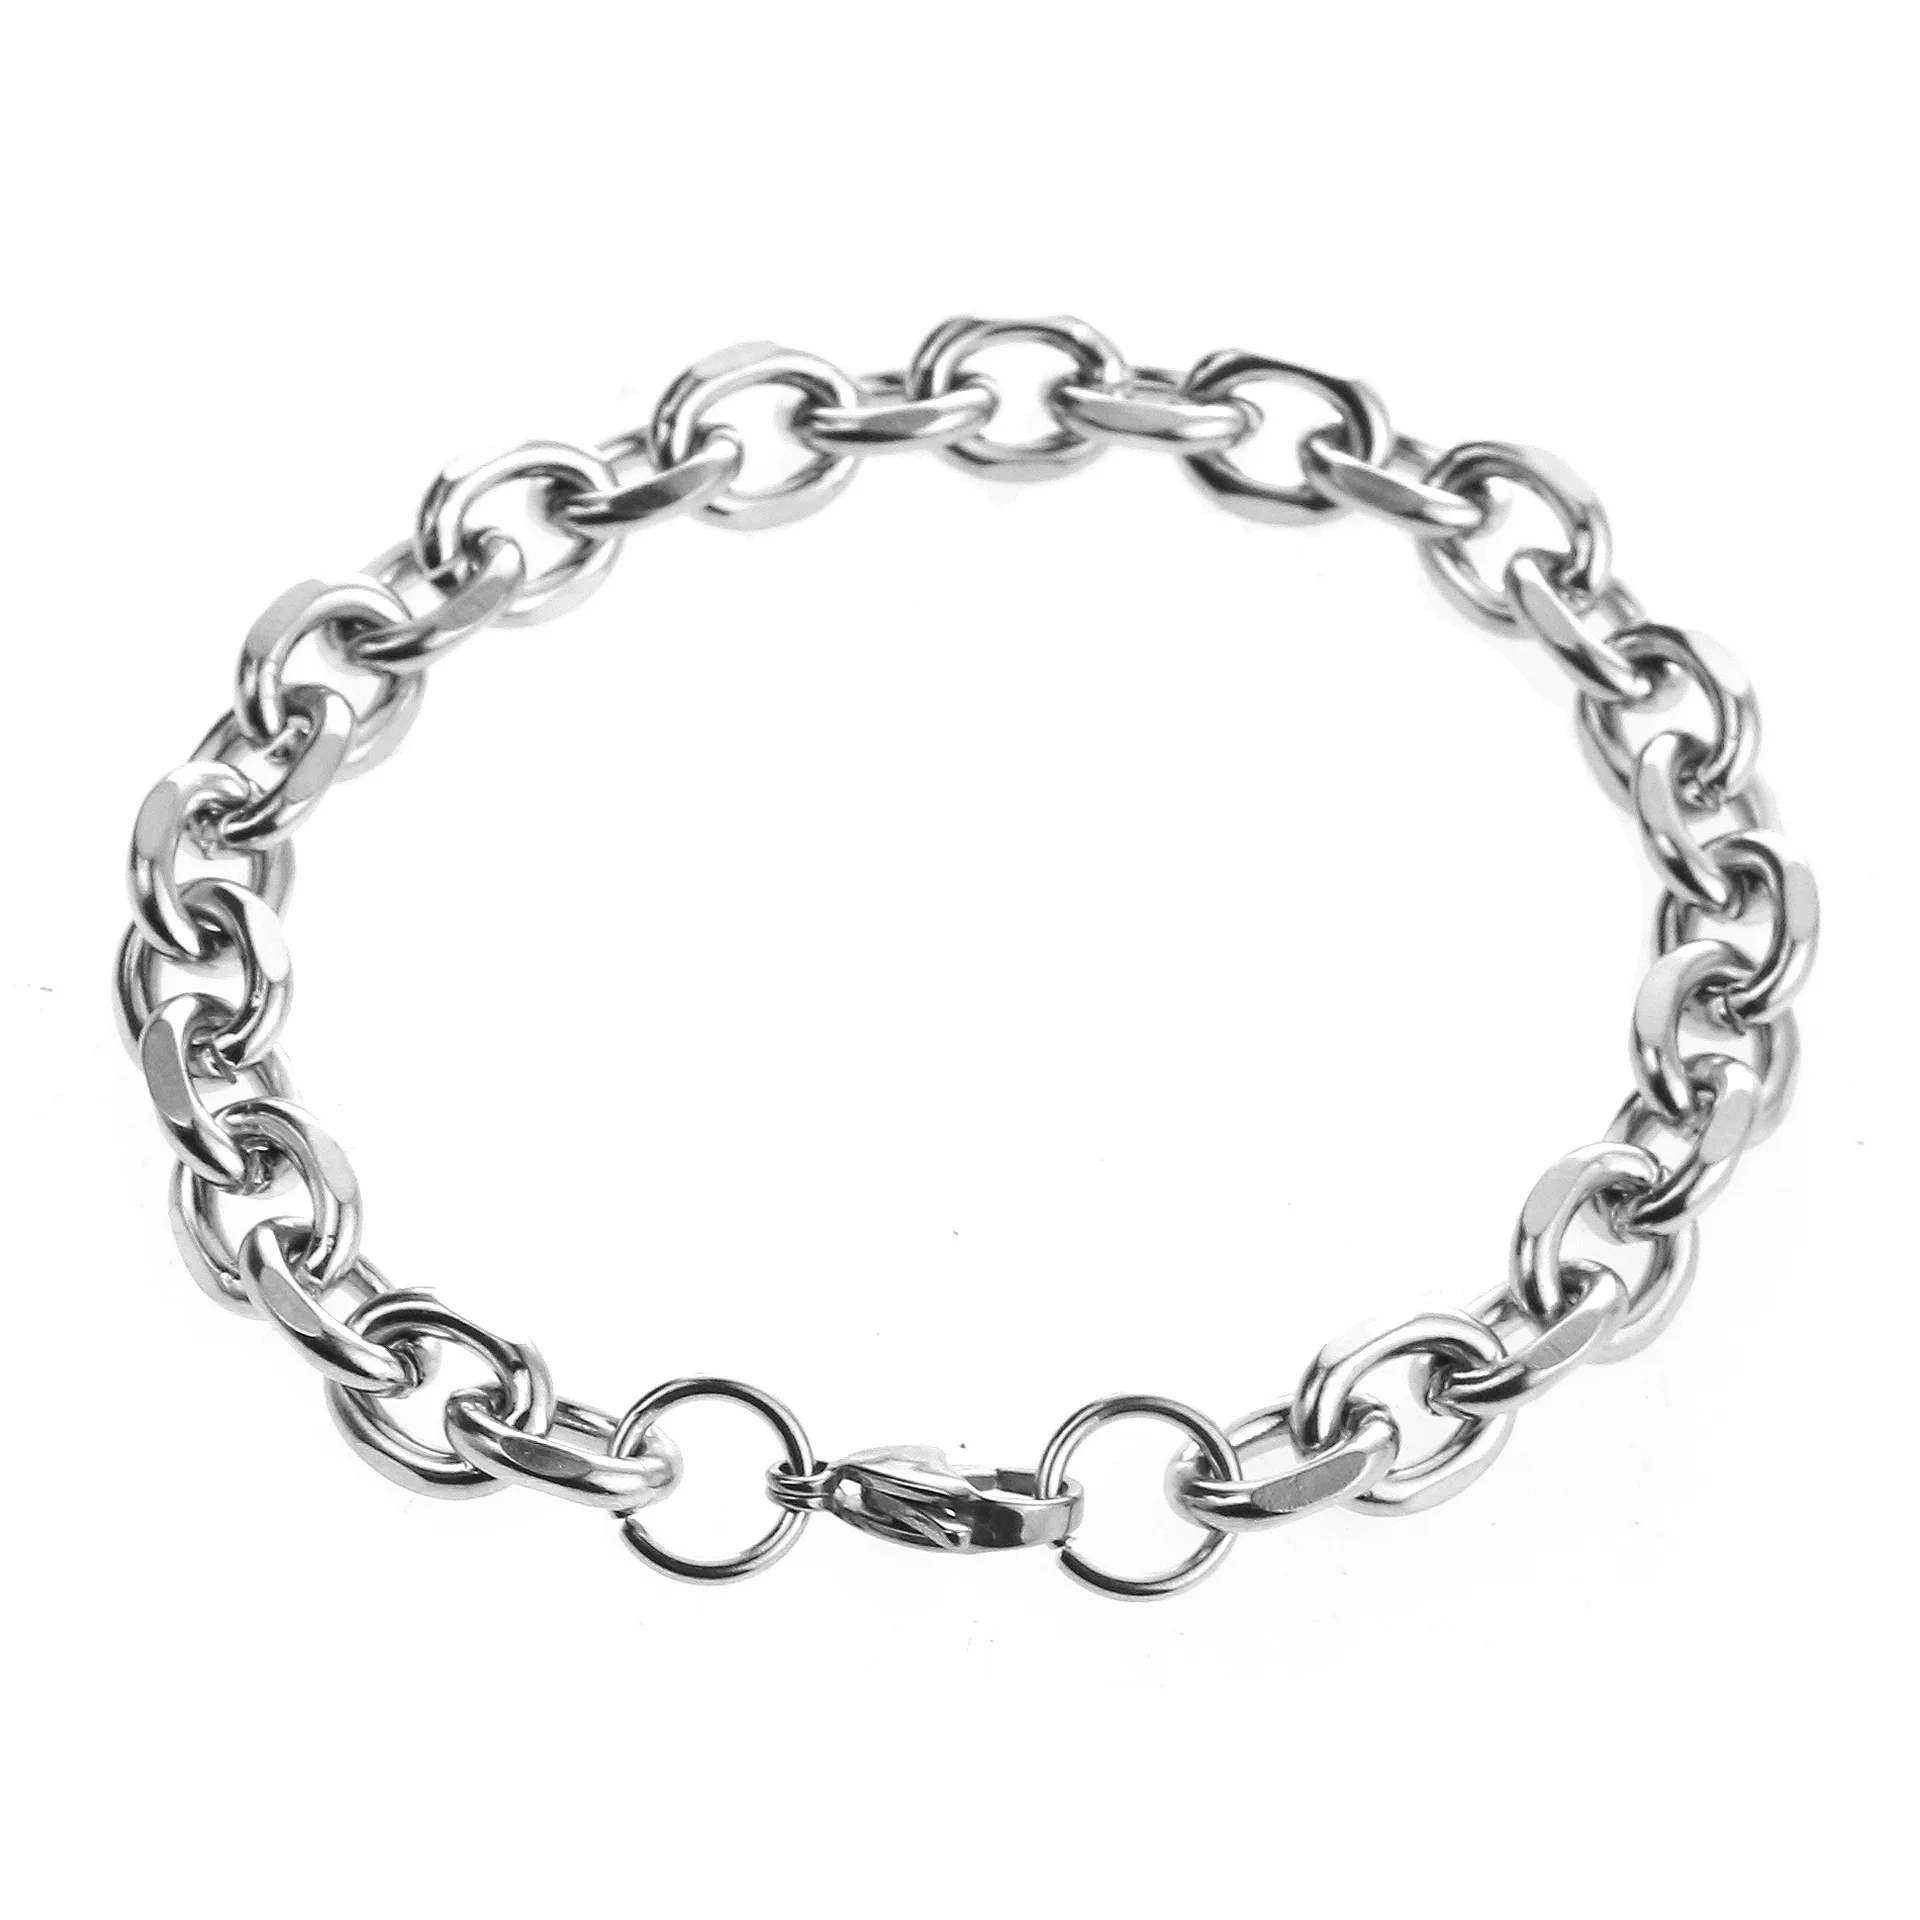 Buy Stainless Steel Bracelet For Men Online  Inox Jewelry Tagged  Cappuccino  Inox Jewelry India